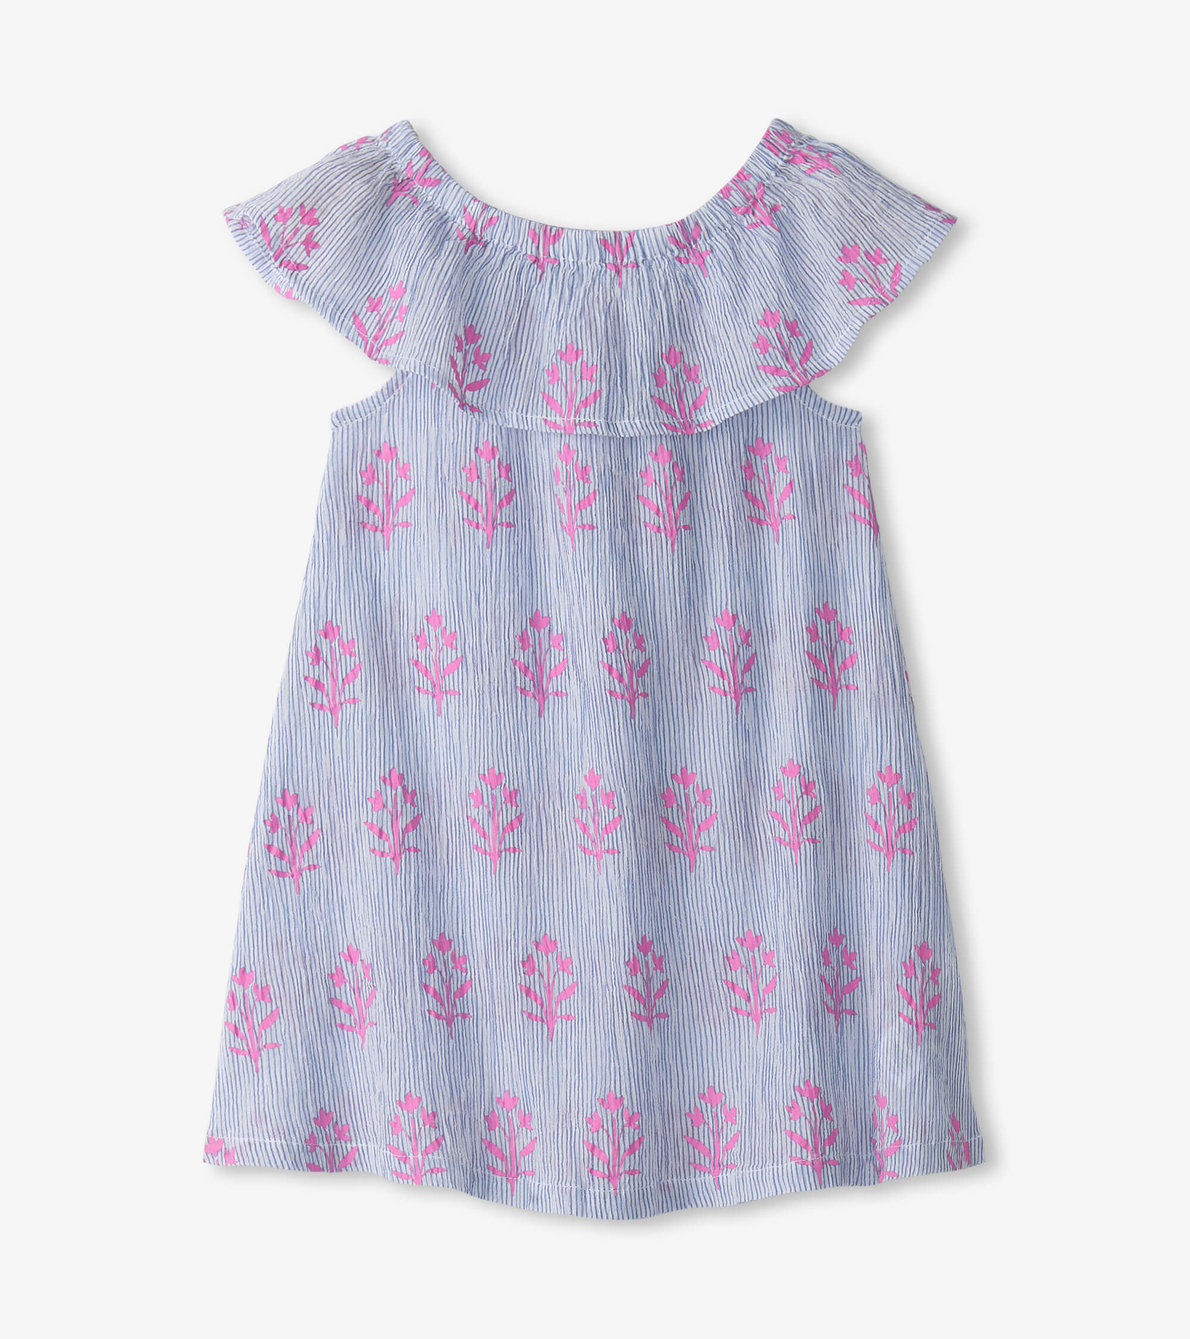 View larger image of Baby & Toddler Girls Wild Flower Ruffle A-Line Dress